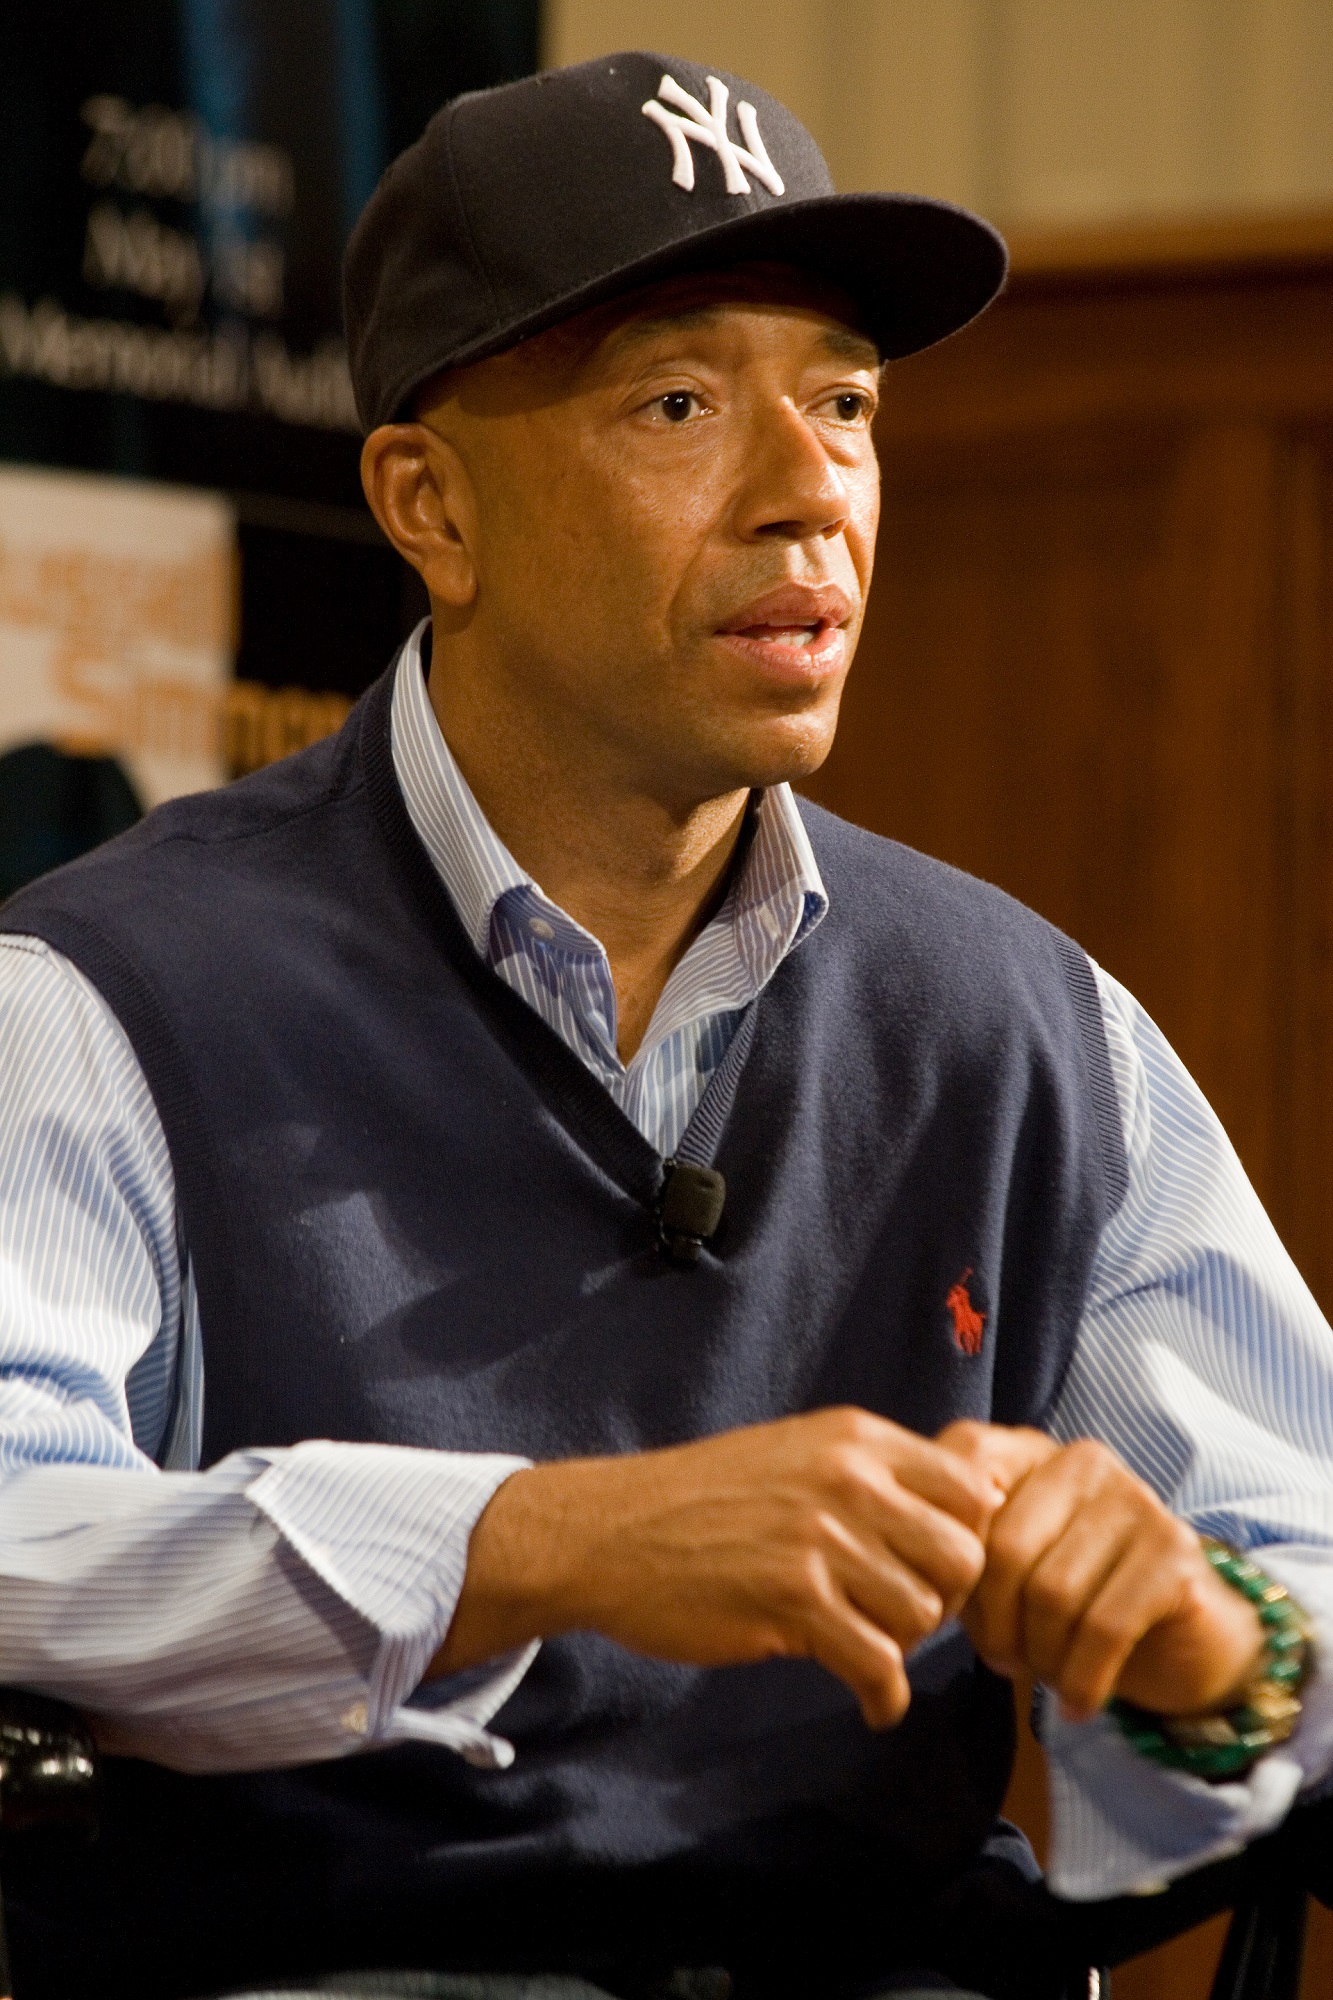 Russell Simmons is a vegan